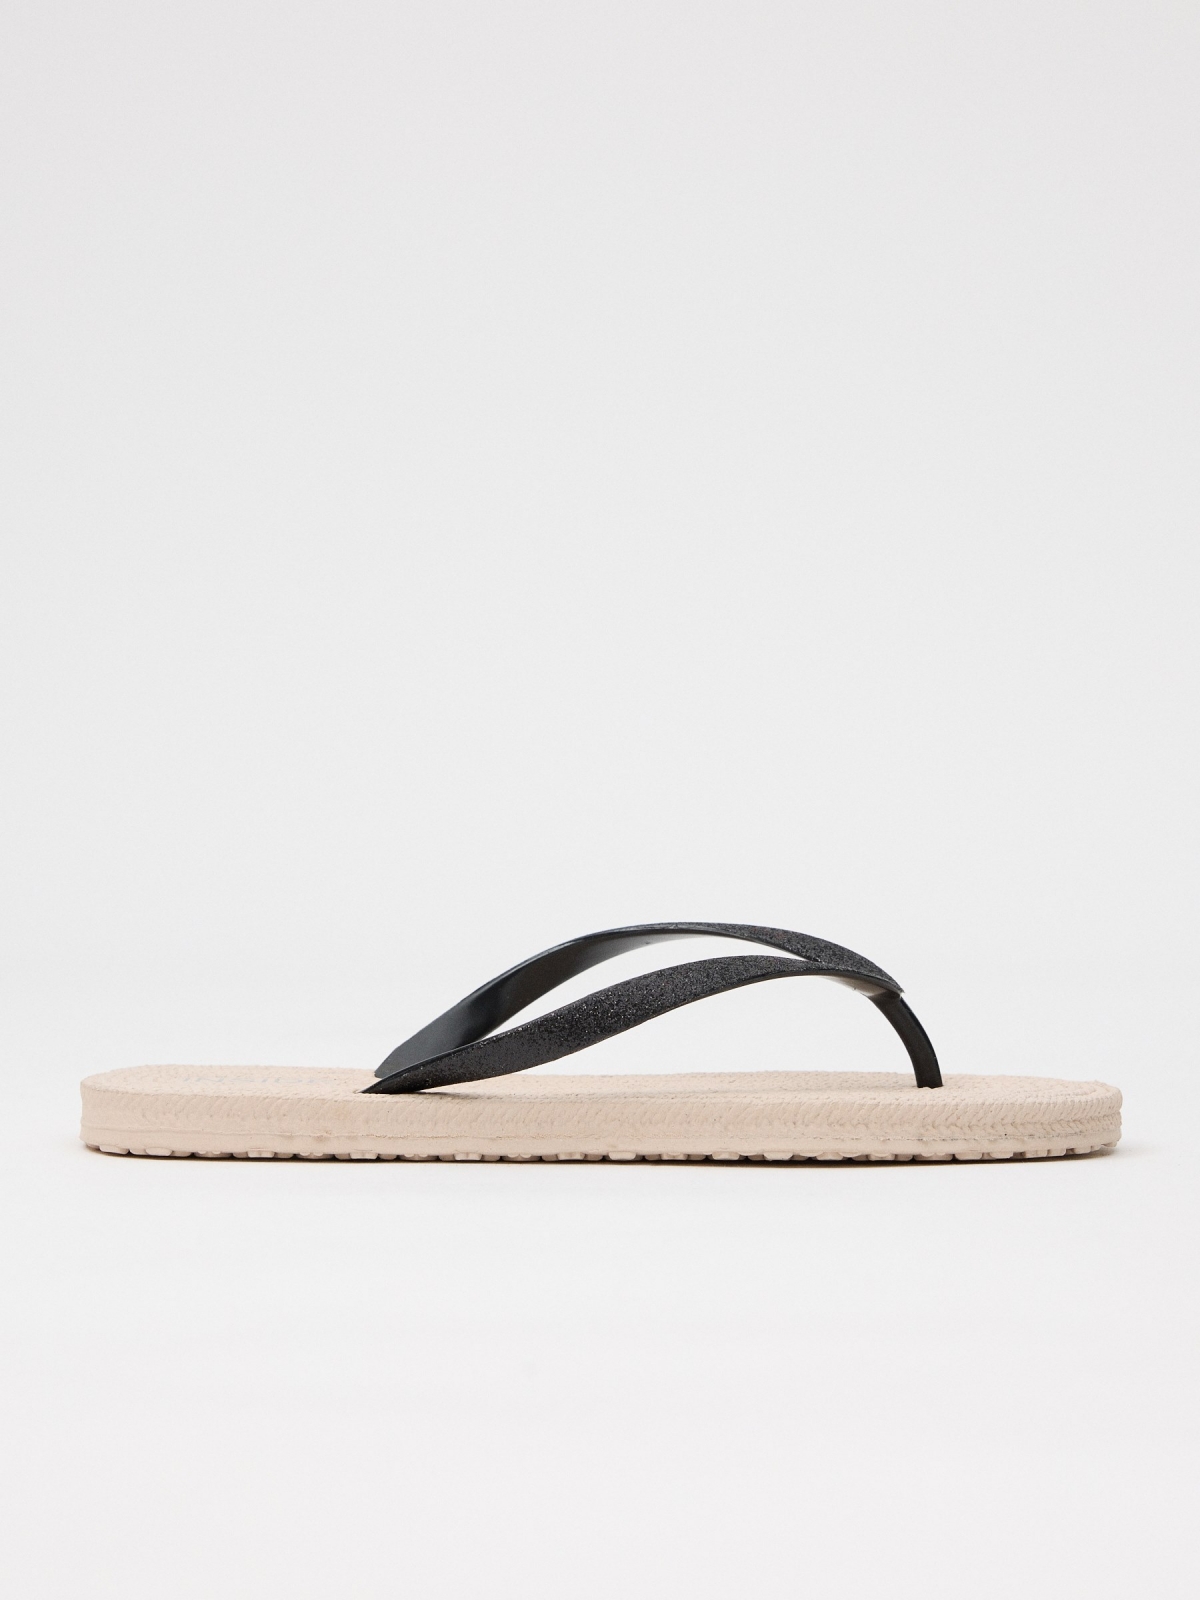 Beach flip flops with shiny toe strap black/beige lateral view